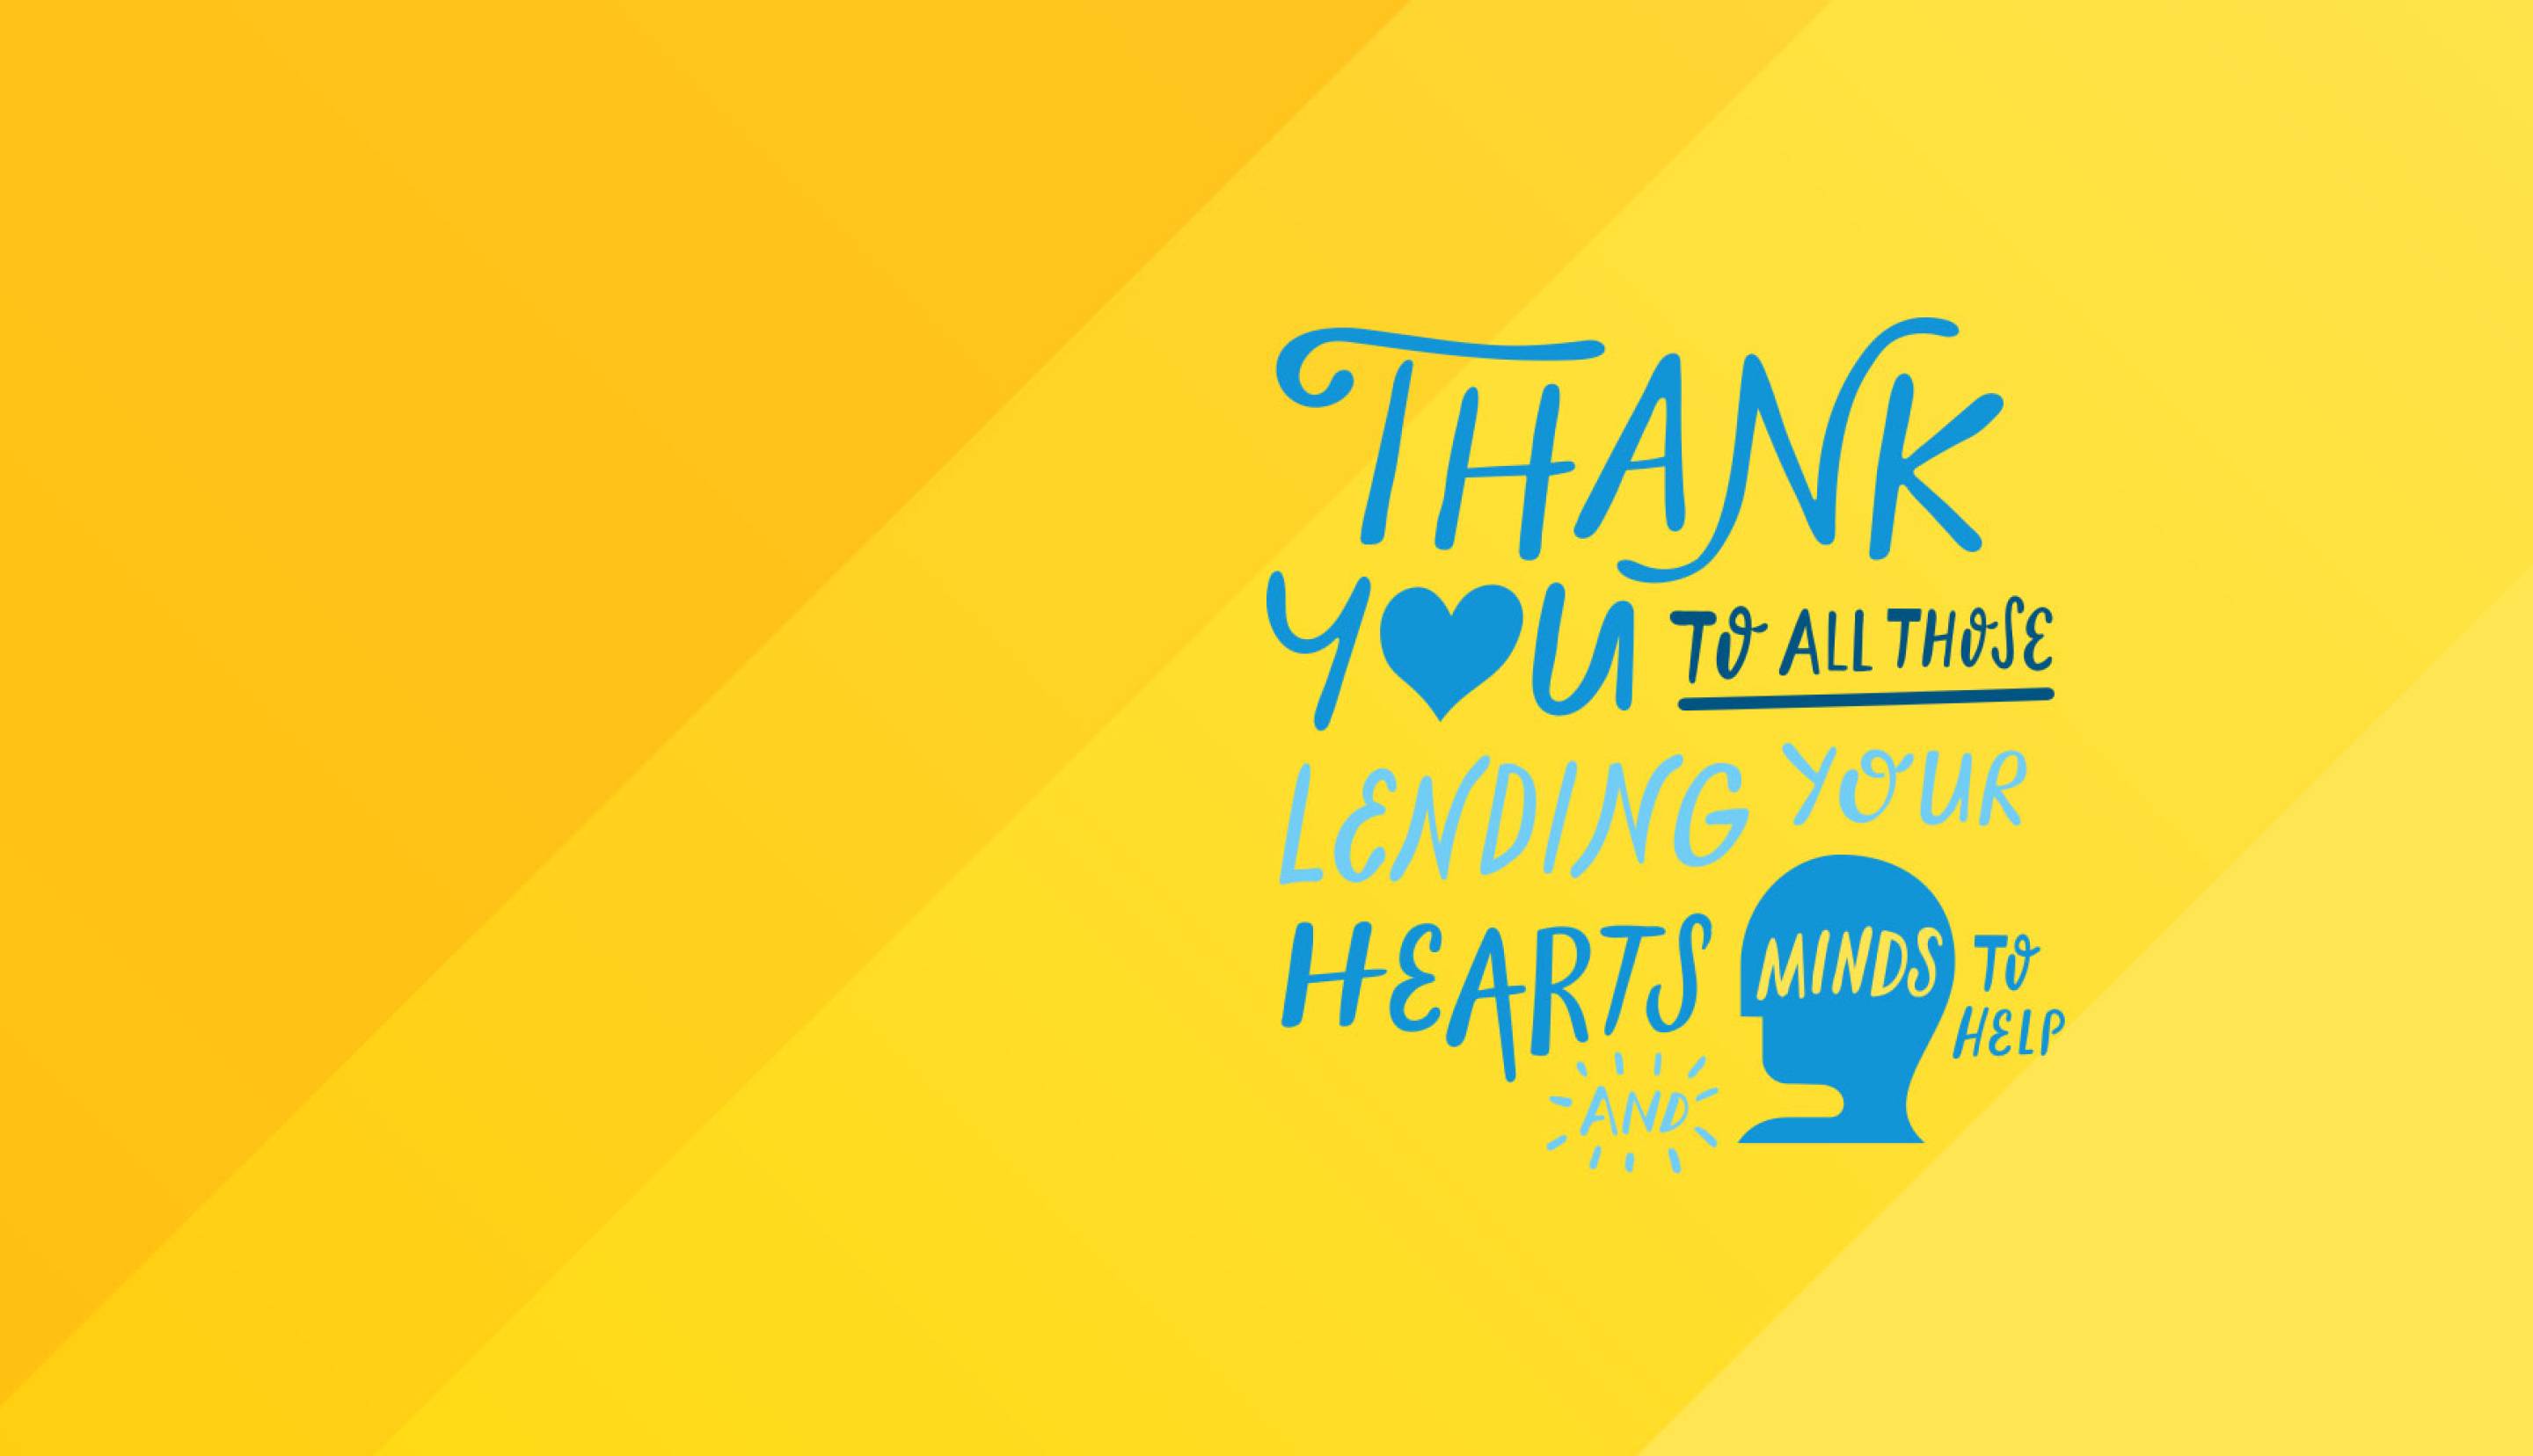 Illustrated quote "Thank you to all those lending your hearts and minds to help"